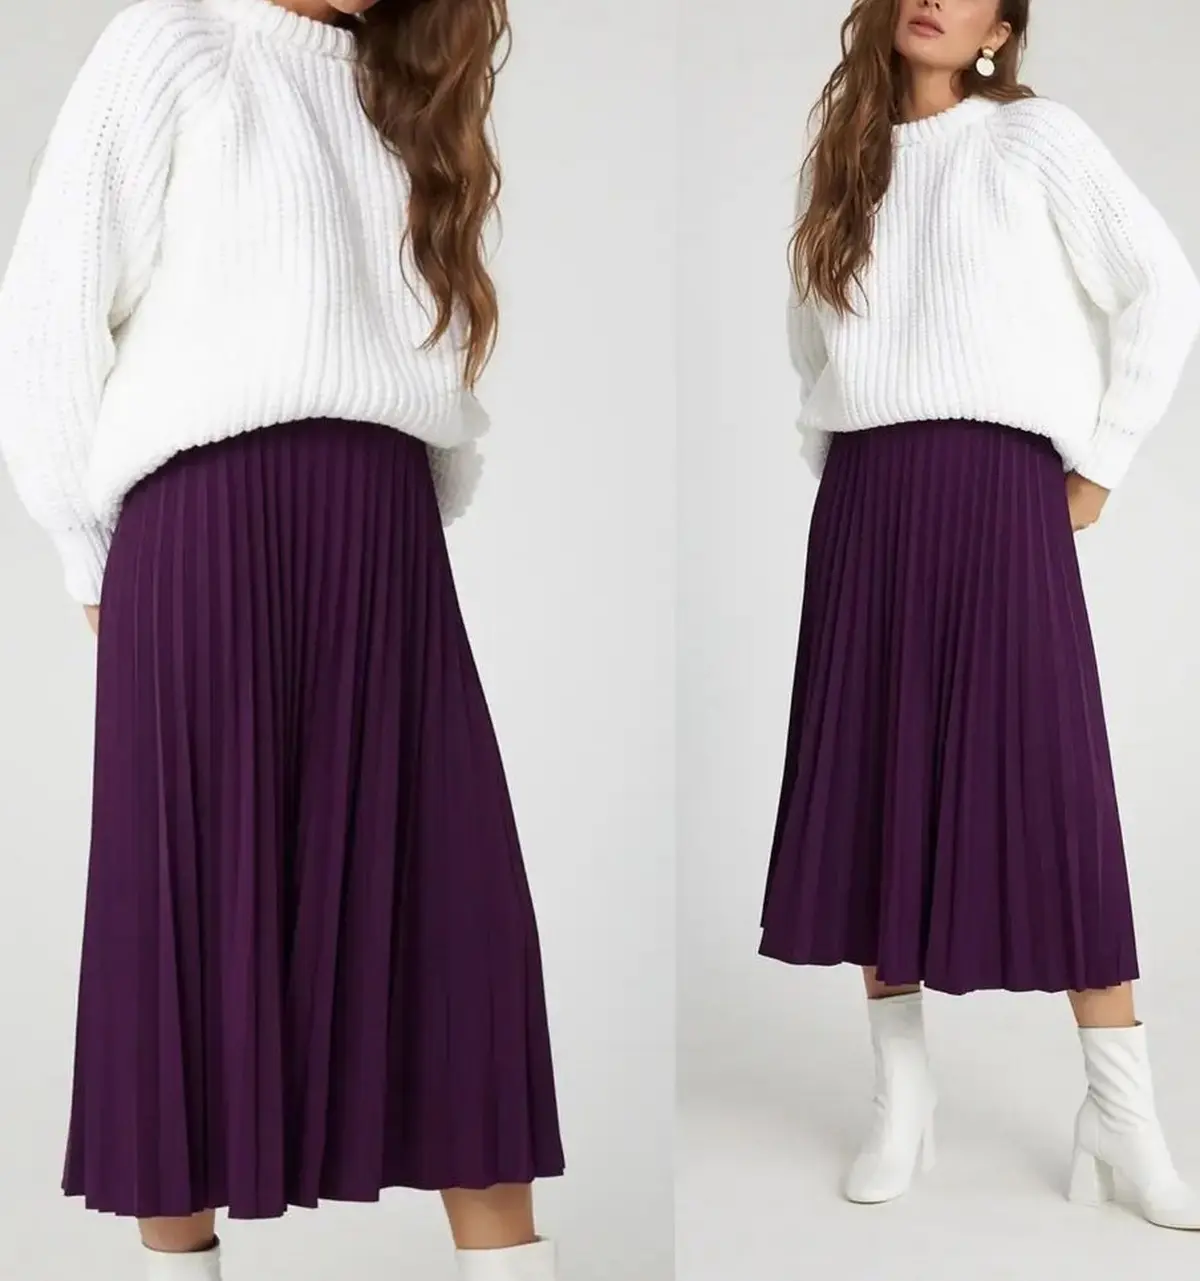 dark purple skirt paired with white sweater and boots perfect for winter